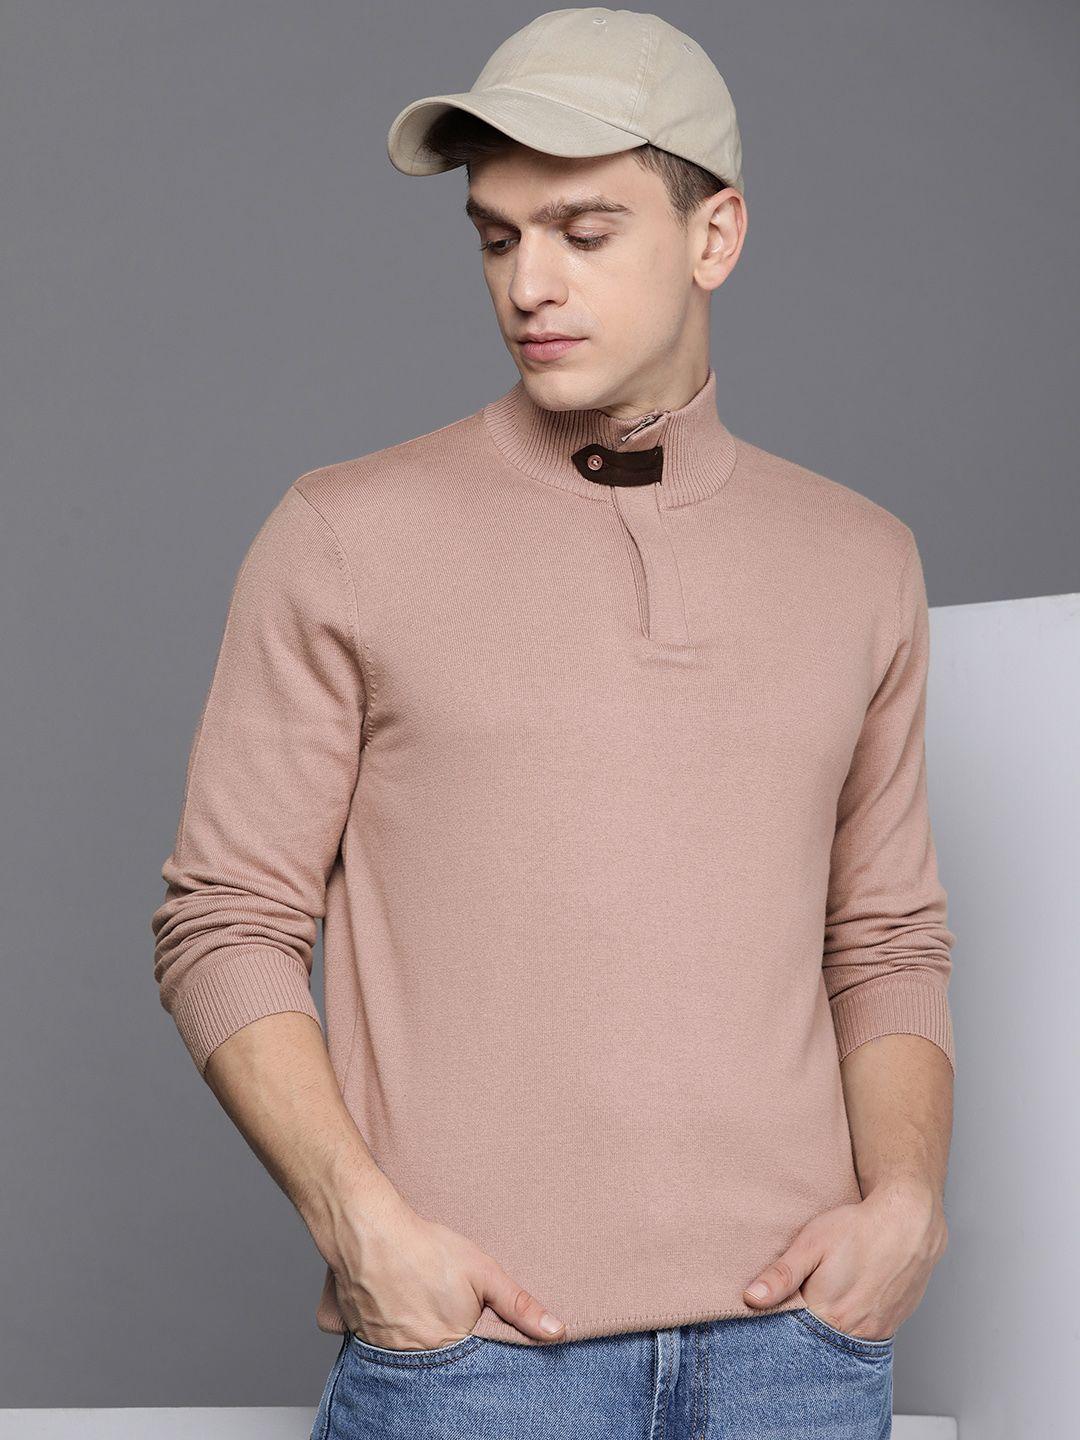 kenneth-cole-men-rose-solid-mock-collar-pullover-sweater